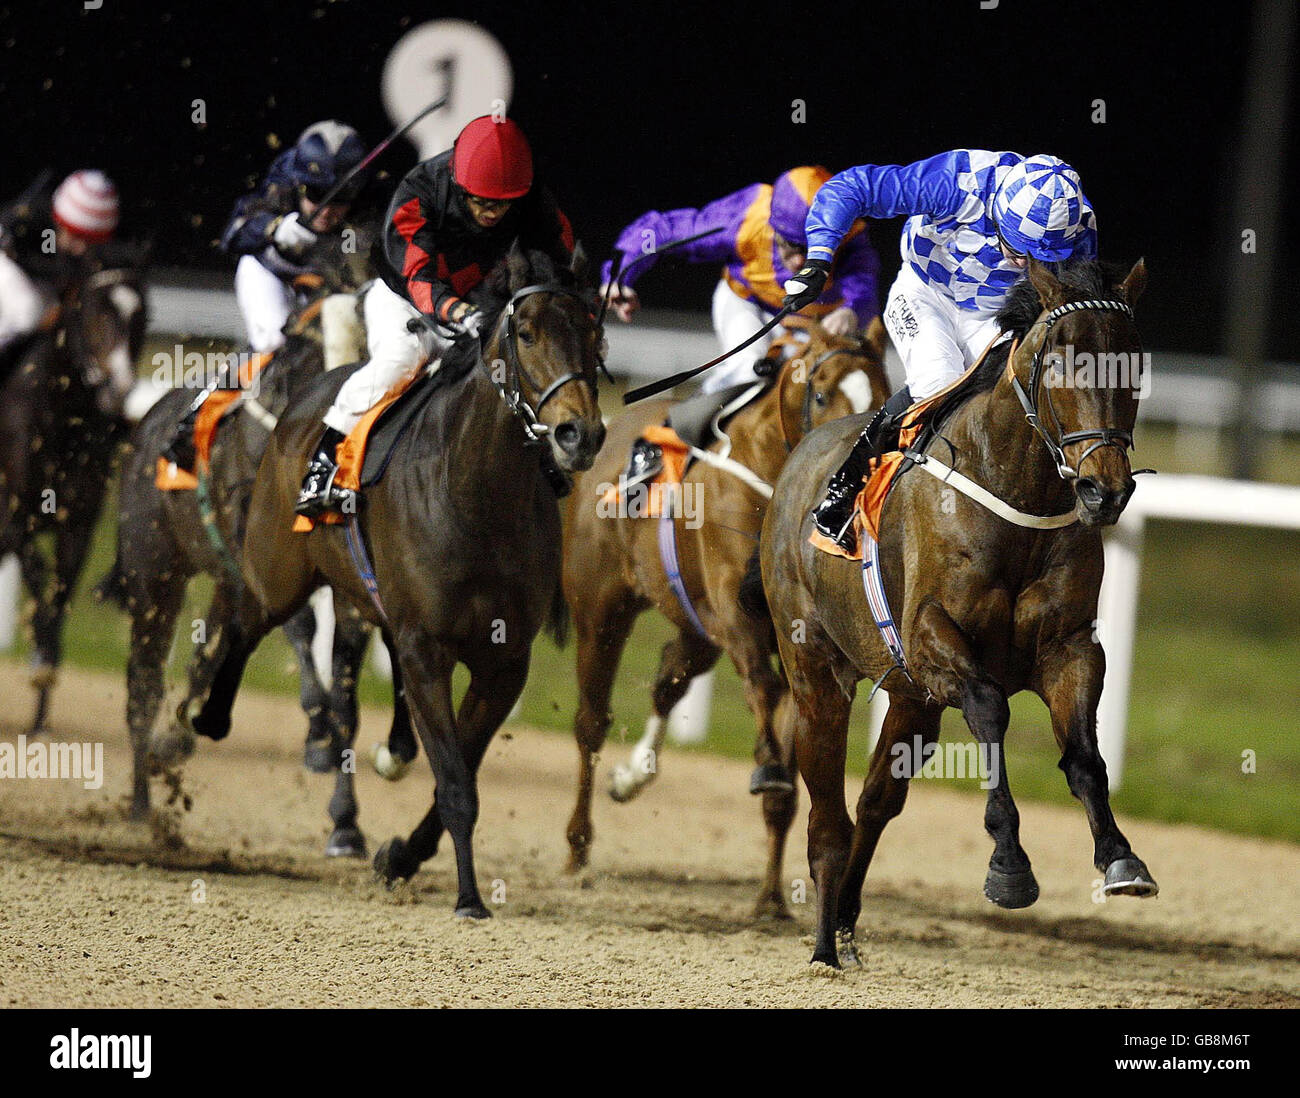 Awatuki and jockey Pat Cosgrave (right) wins the Wivenhoe Handicap at Great Leighs Racecourse, Chelmsford. Stock Photo